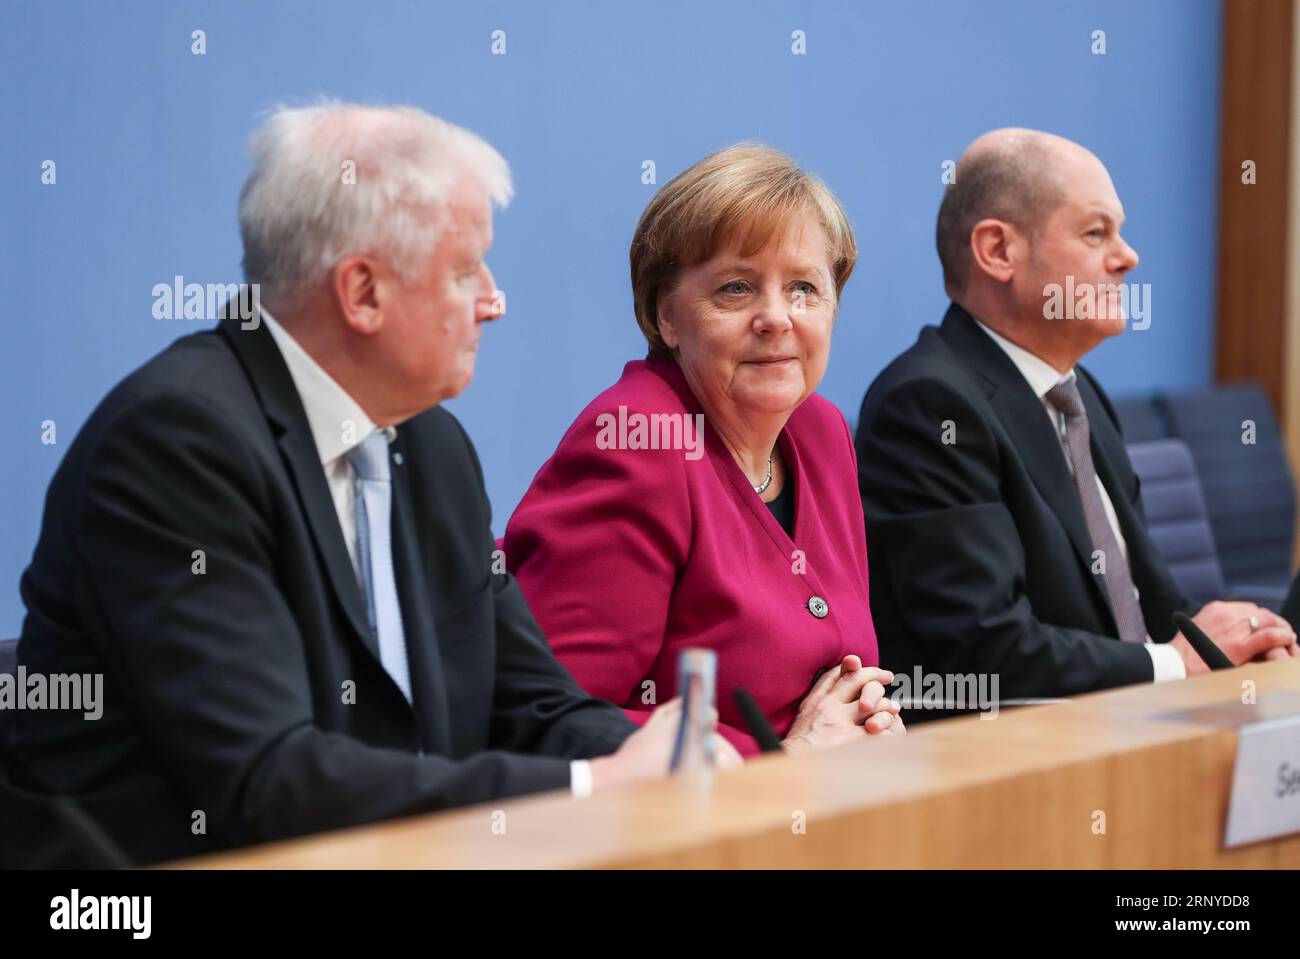 (180312) -- BERLIN, March 12, 2018 -- German Chancellor and Christian Democratic Union (CDU) leader Angela Merkel (C), interim German Social Democrats (SPD) leader Olaf Scholz (R) and Christian Social Union (CSU) leader Horst Seehofer attend a press conference in Berlin, capital of Germany, on March 12, 2018. The leaders of the Christian Democratic Union (CDU), Christian Social Union (CSU) and German Social Democrats (SPD) revealed the key priorities of Germany s new federal government on Monday. ) GERMANY-BERLIN-GRAND COALITION-AGREEMENT ShanxYuqi PUBLICATIONxNOTxINxCHN Stock Photo